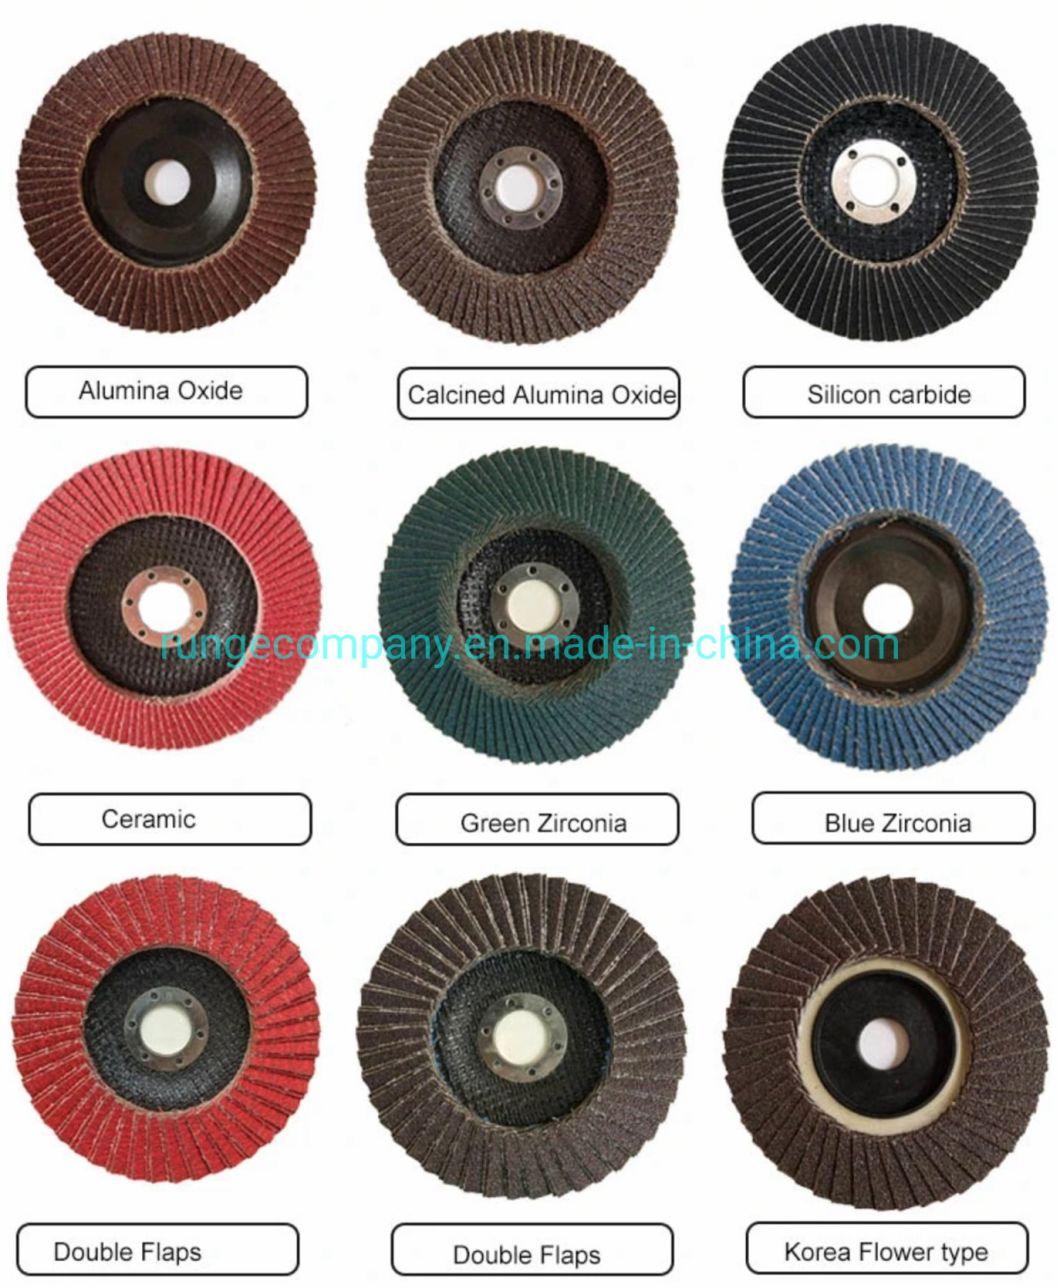 Power Electric Tools Accessories 4.5"X3/64"X7/8" Cutting Disc Cut-off Wheels Ultra Thin for Metal Stainless Steel